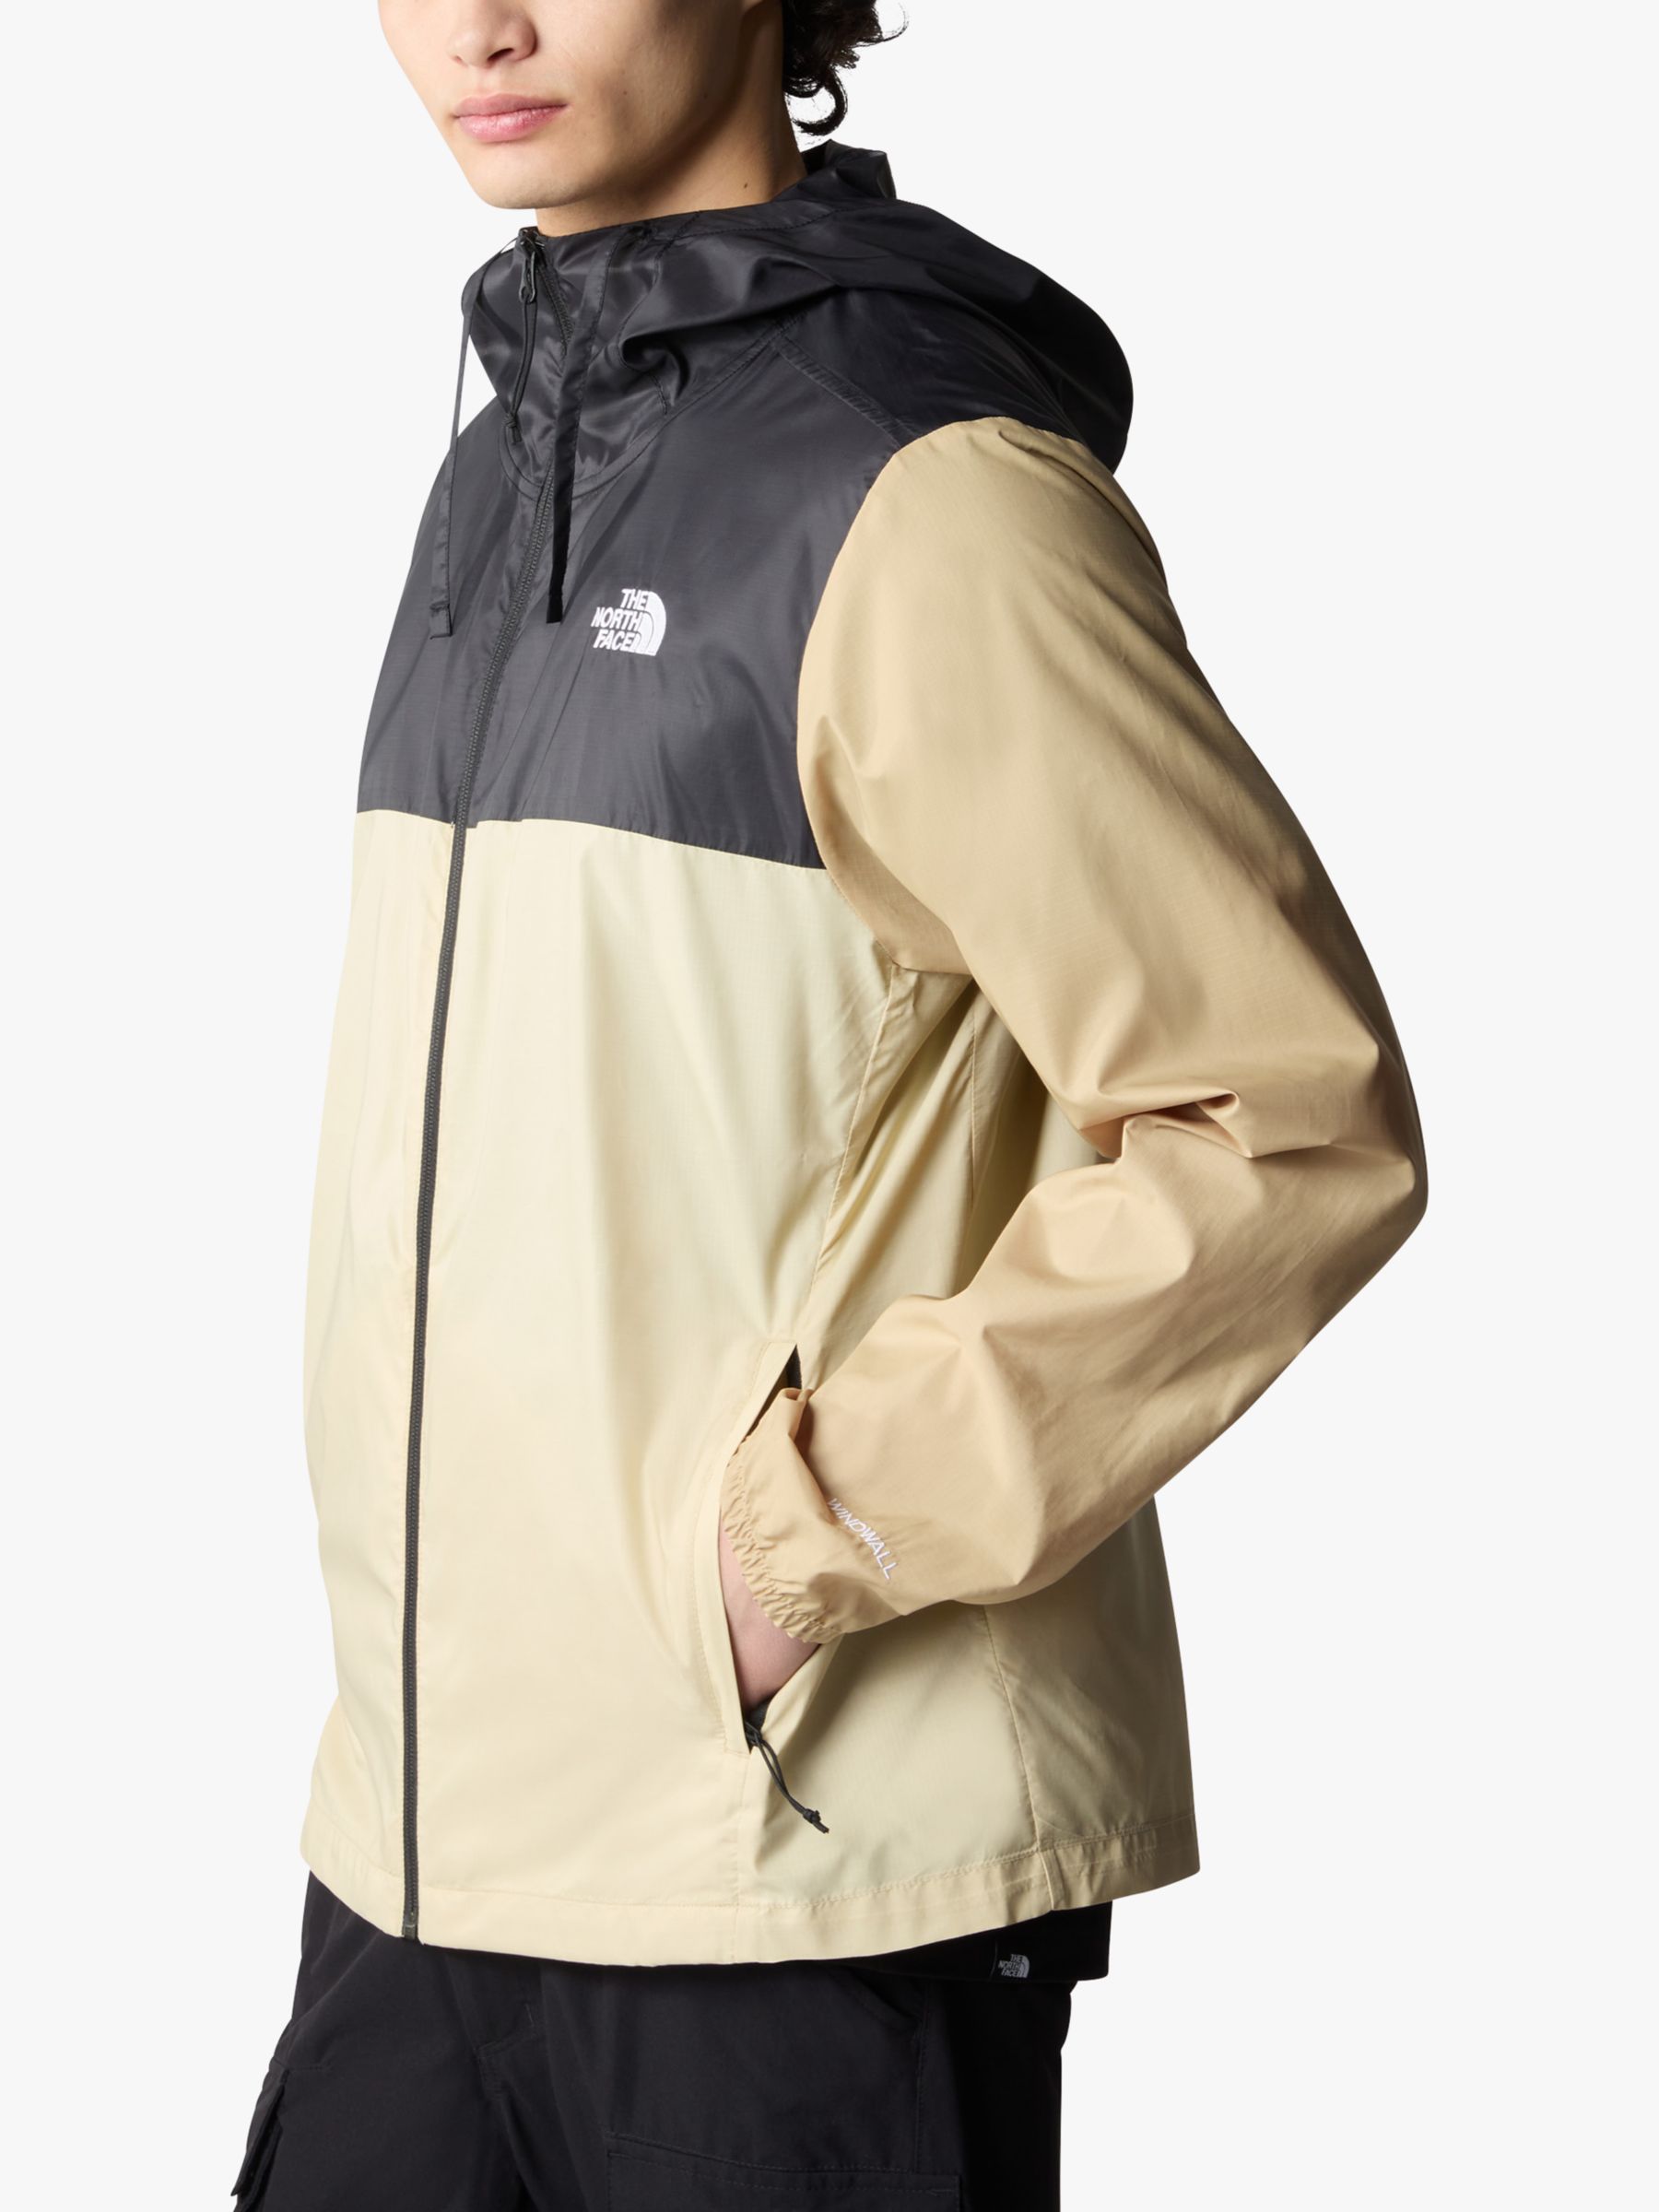 The North Face Men's Cyclone III Jacket, Gravel/Stone, XL